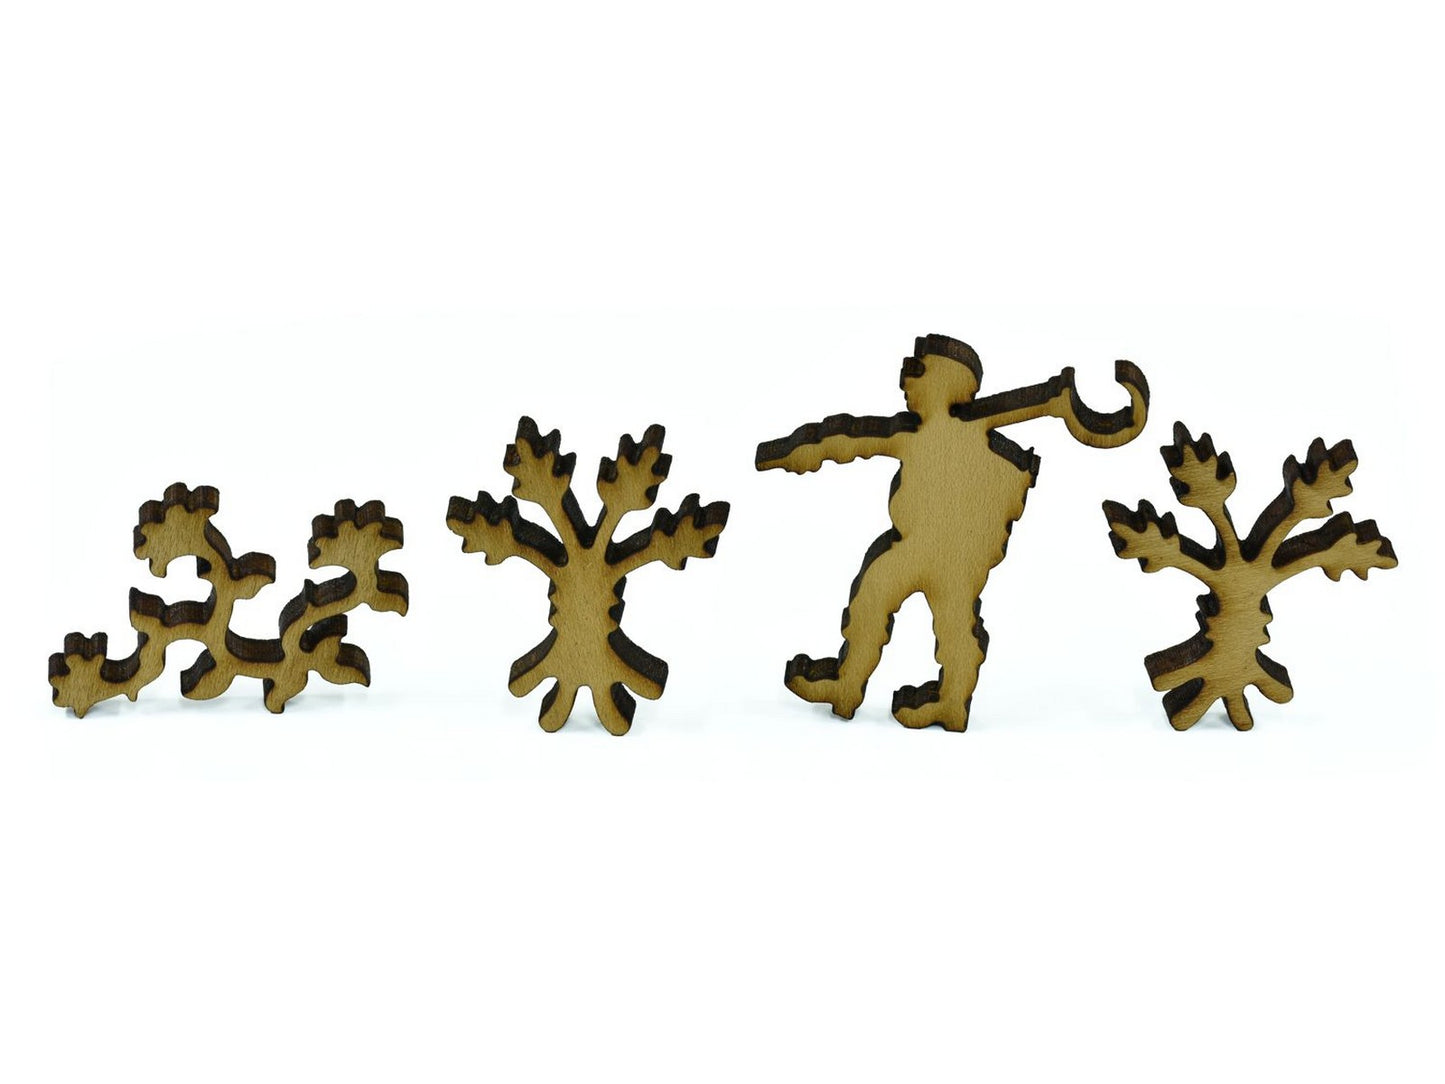 A closeup of pieces in the shape of farmers and plants.